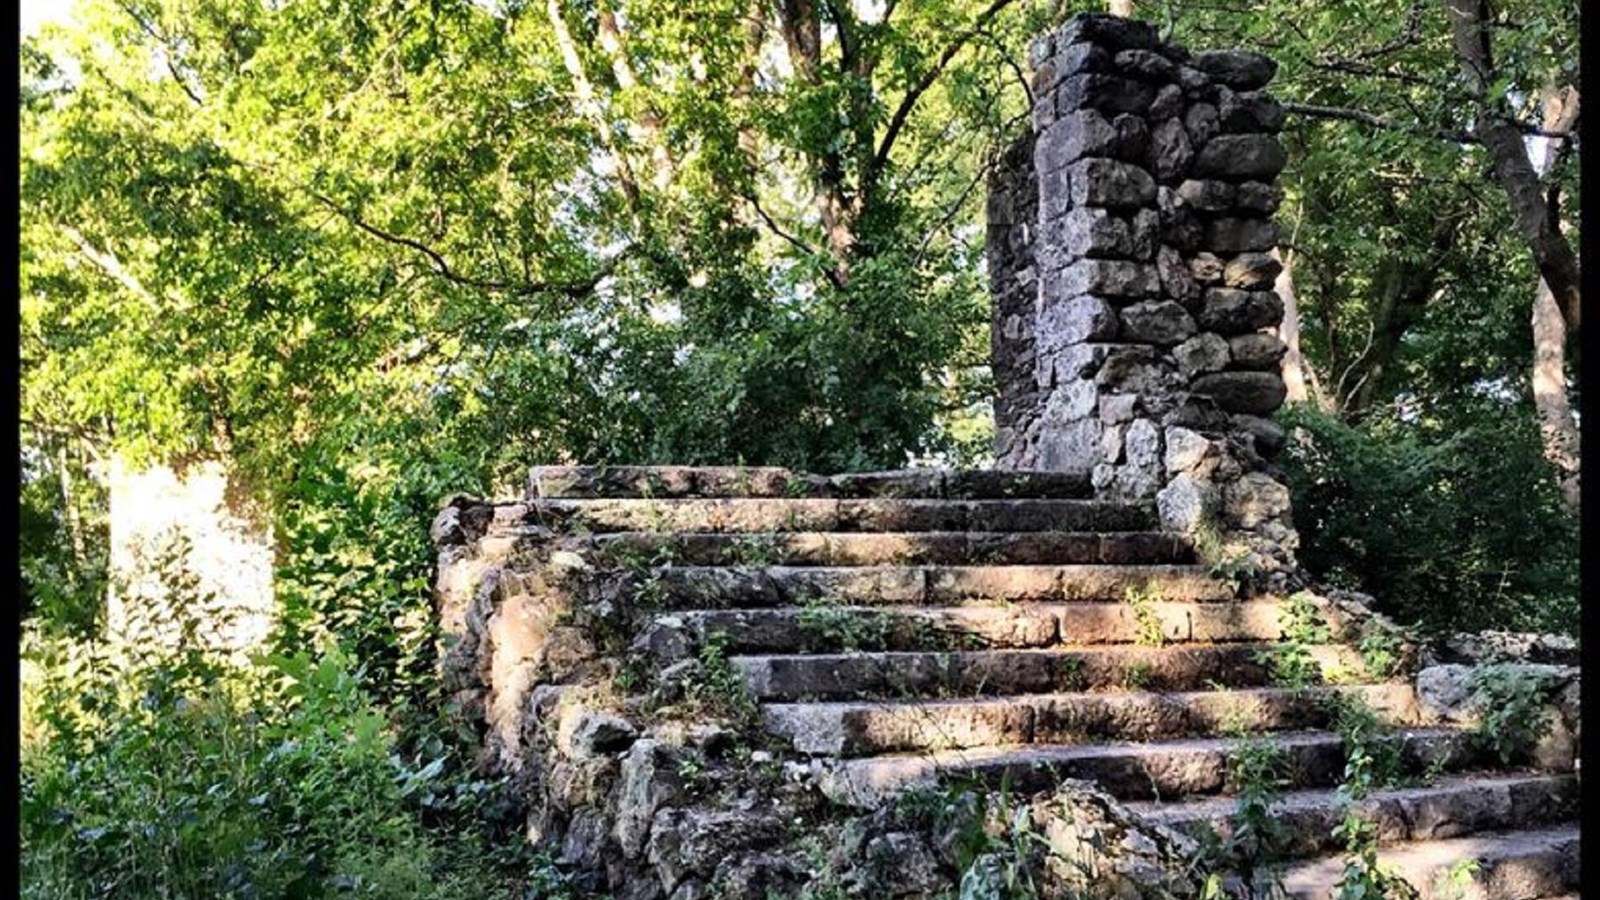 Stone steps and pillar surrounded by trees and shrubs. Stones like ruins.